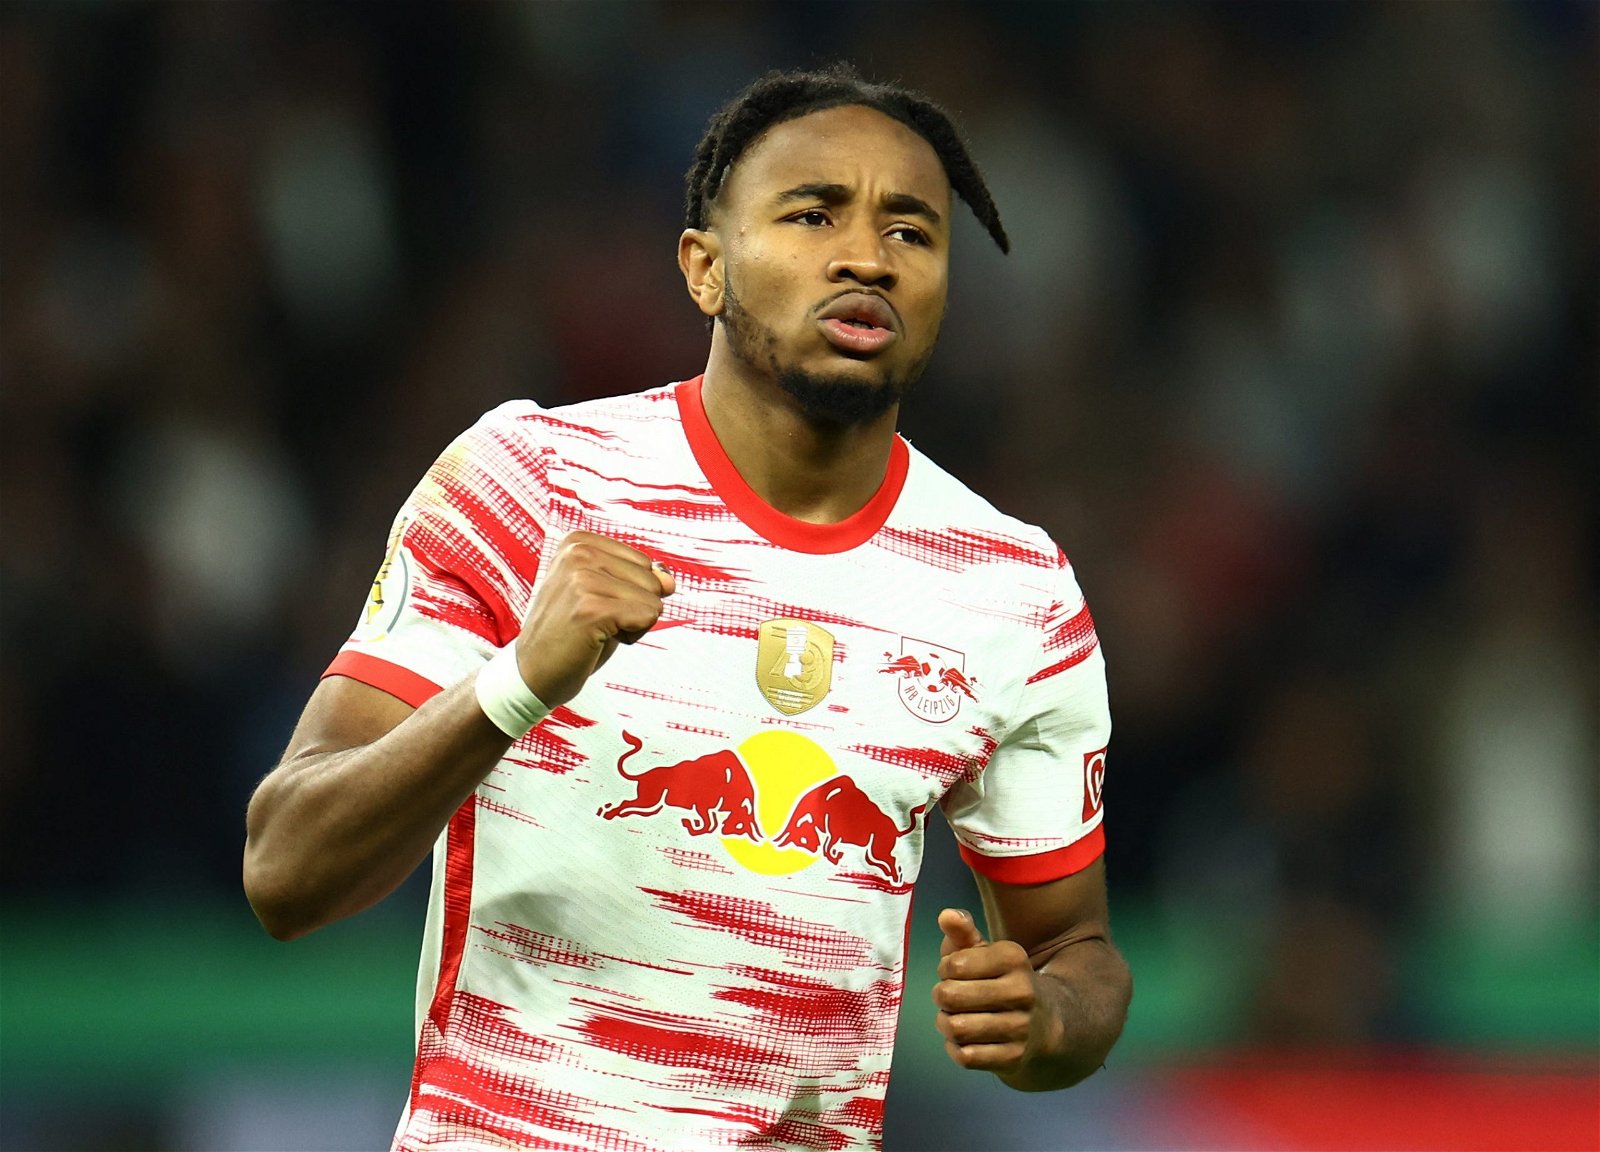 Man Utd targets Nkunku signs new contract to stay at RB Leipzig